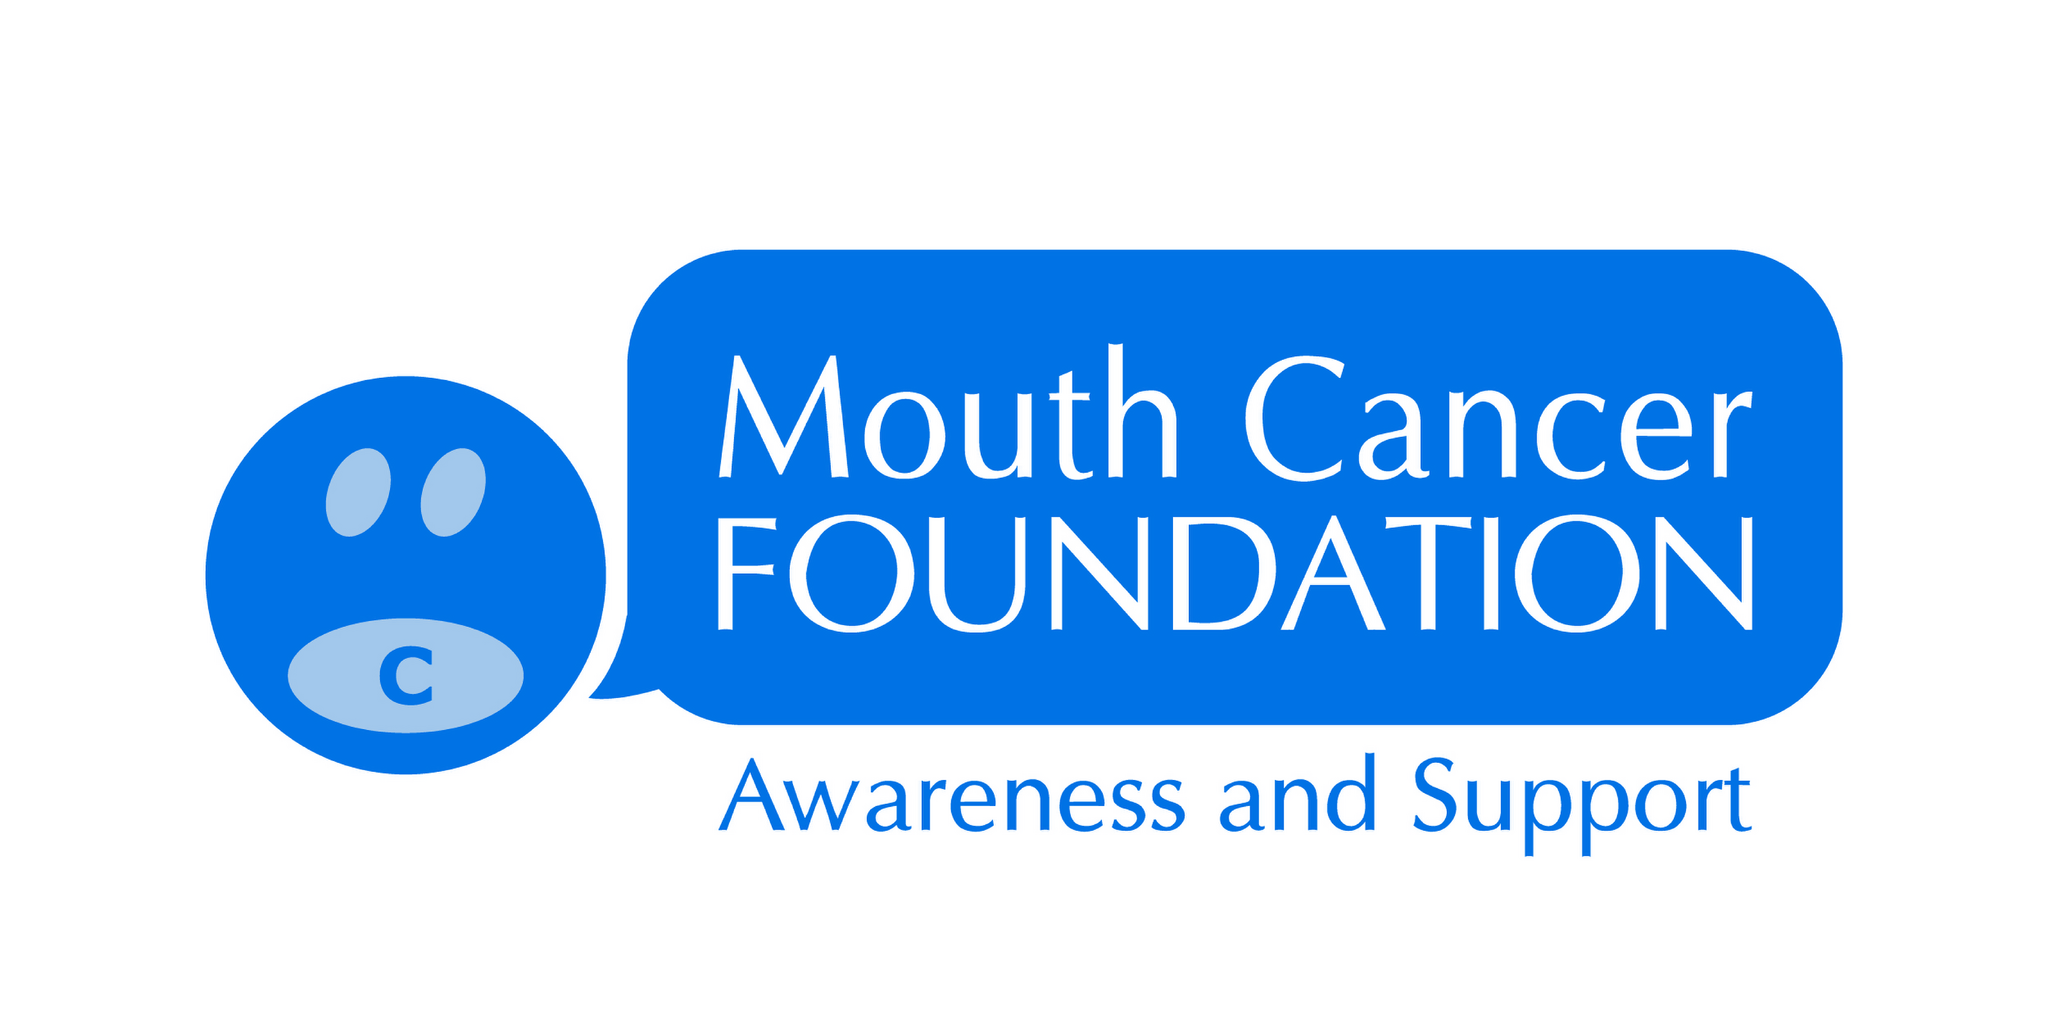 MOUTH CANCER FOUNDATION PRESS EVENT TO ANNOUNCE IMPORTANT CHANGES AT THE CHARITY